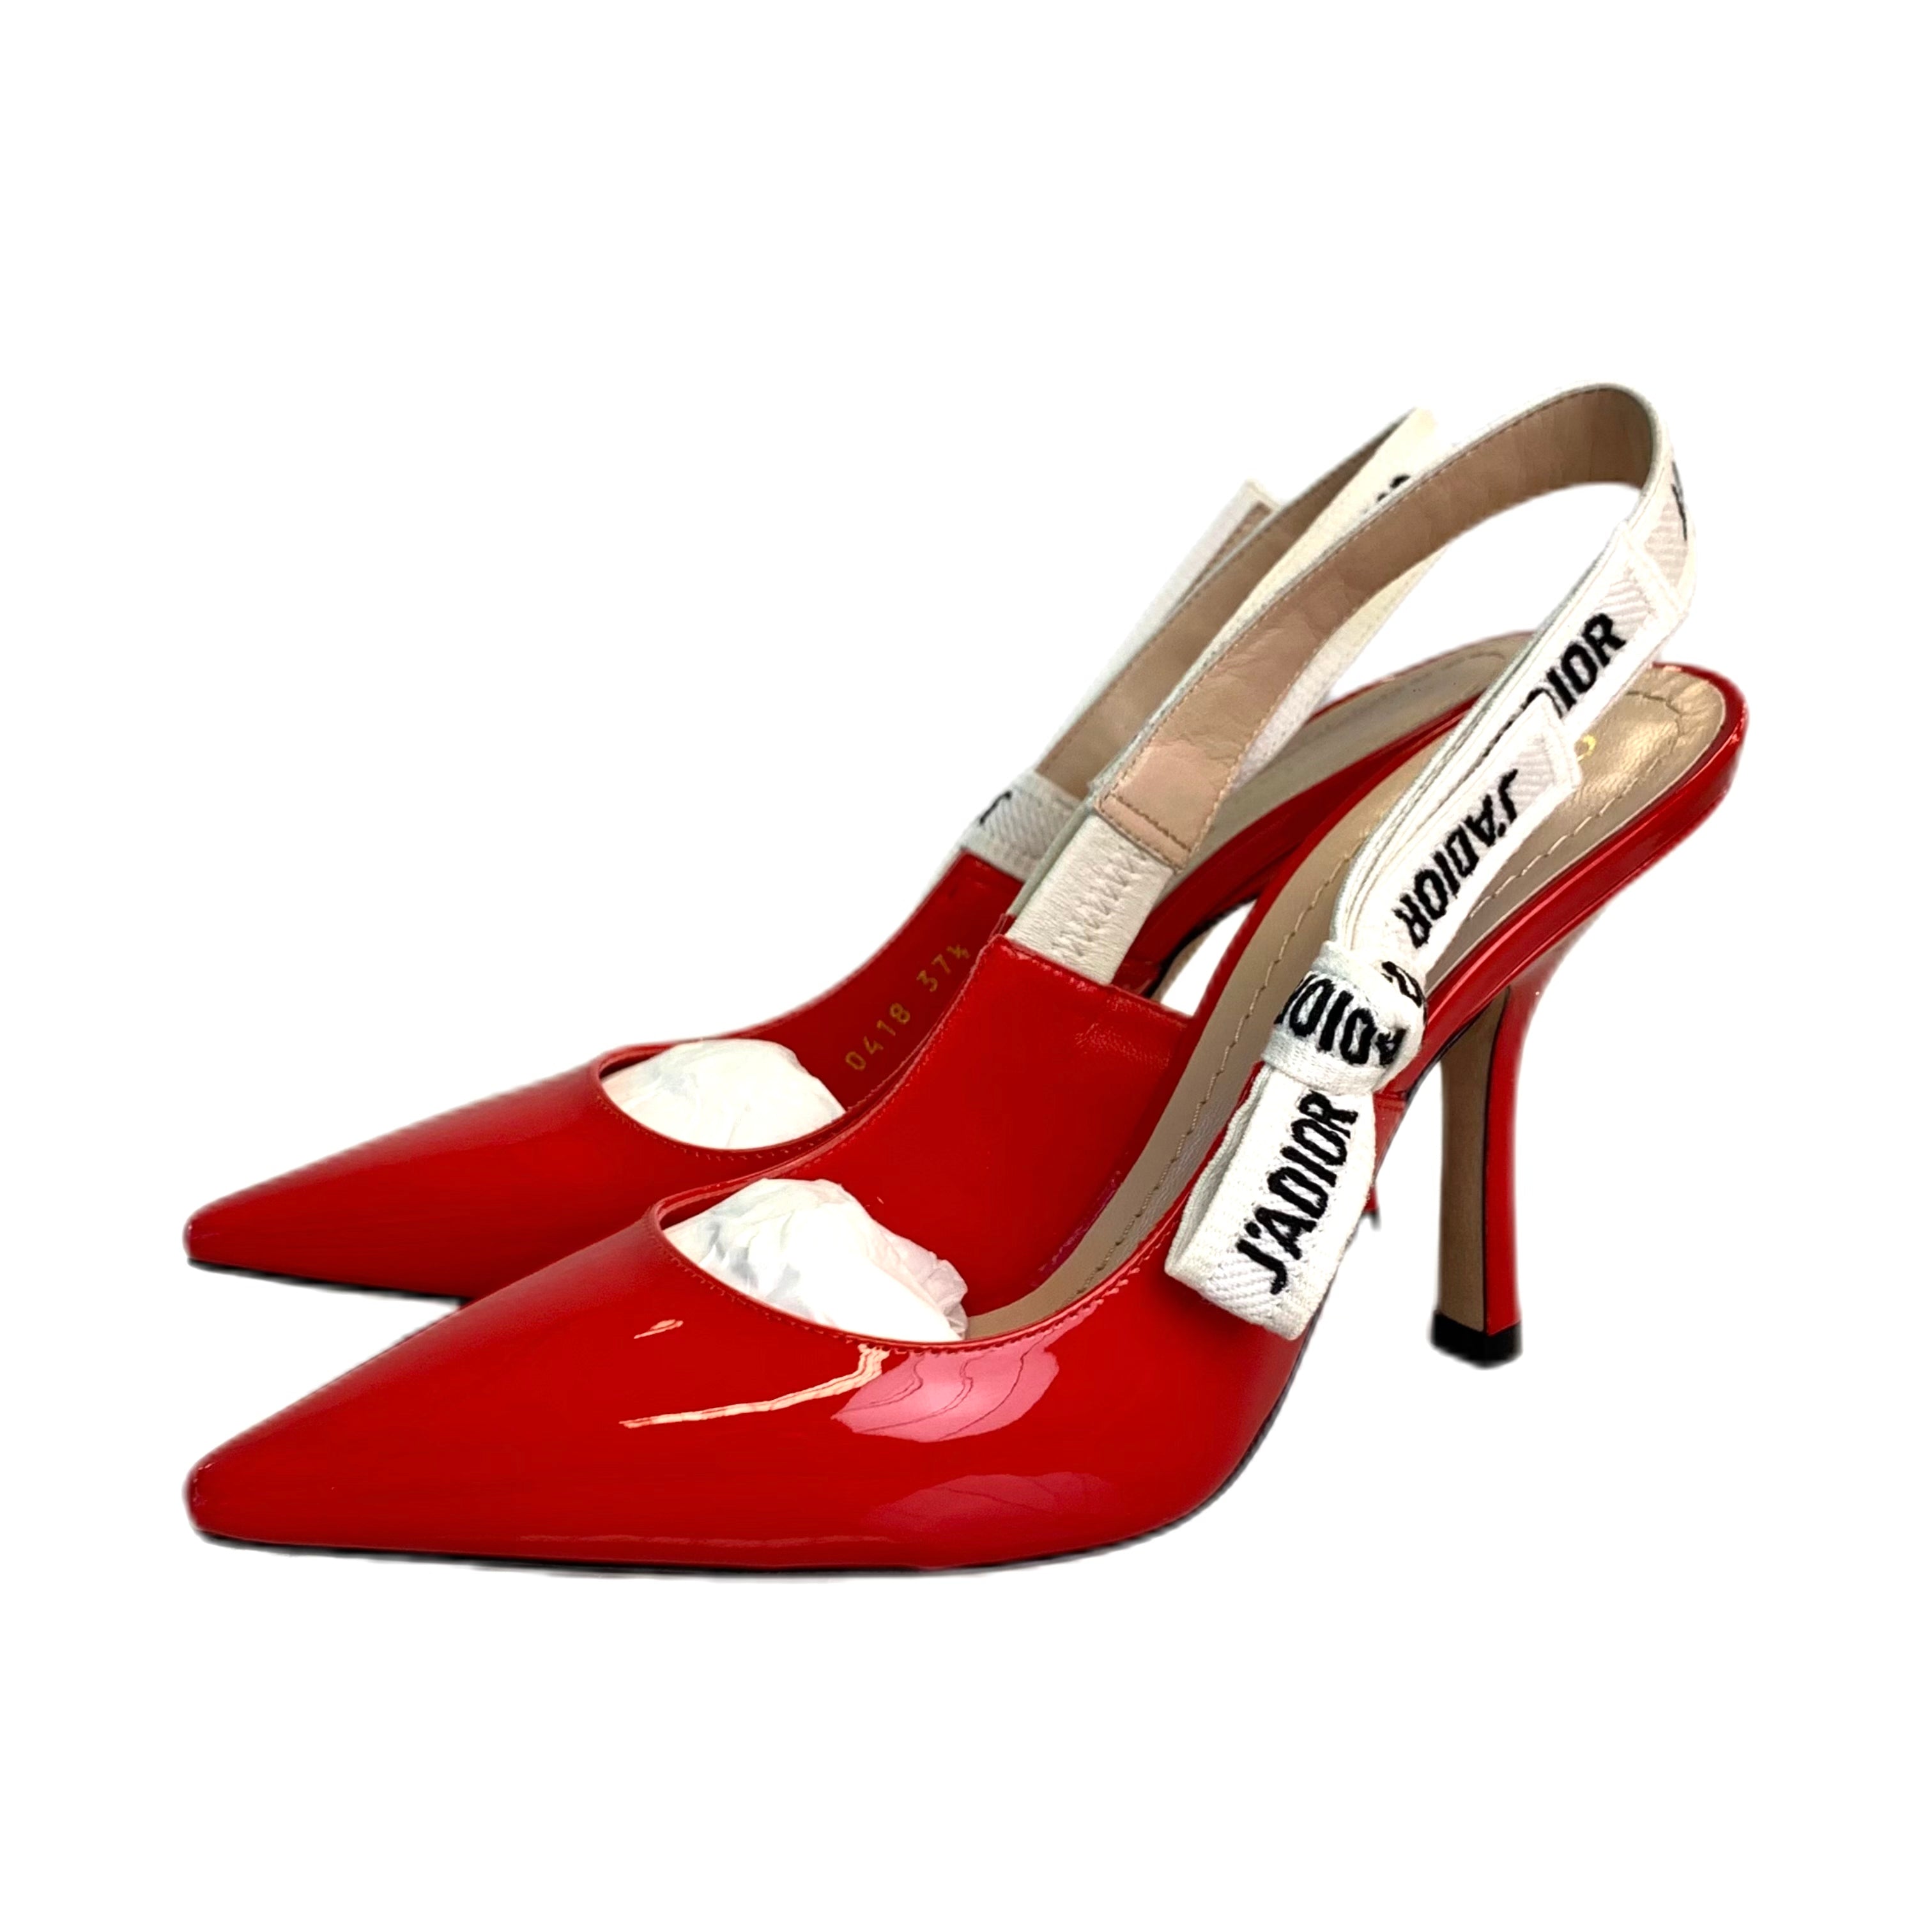 CHRISTIAN DIOR Red Leather Heels